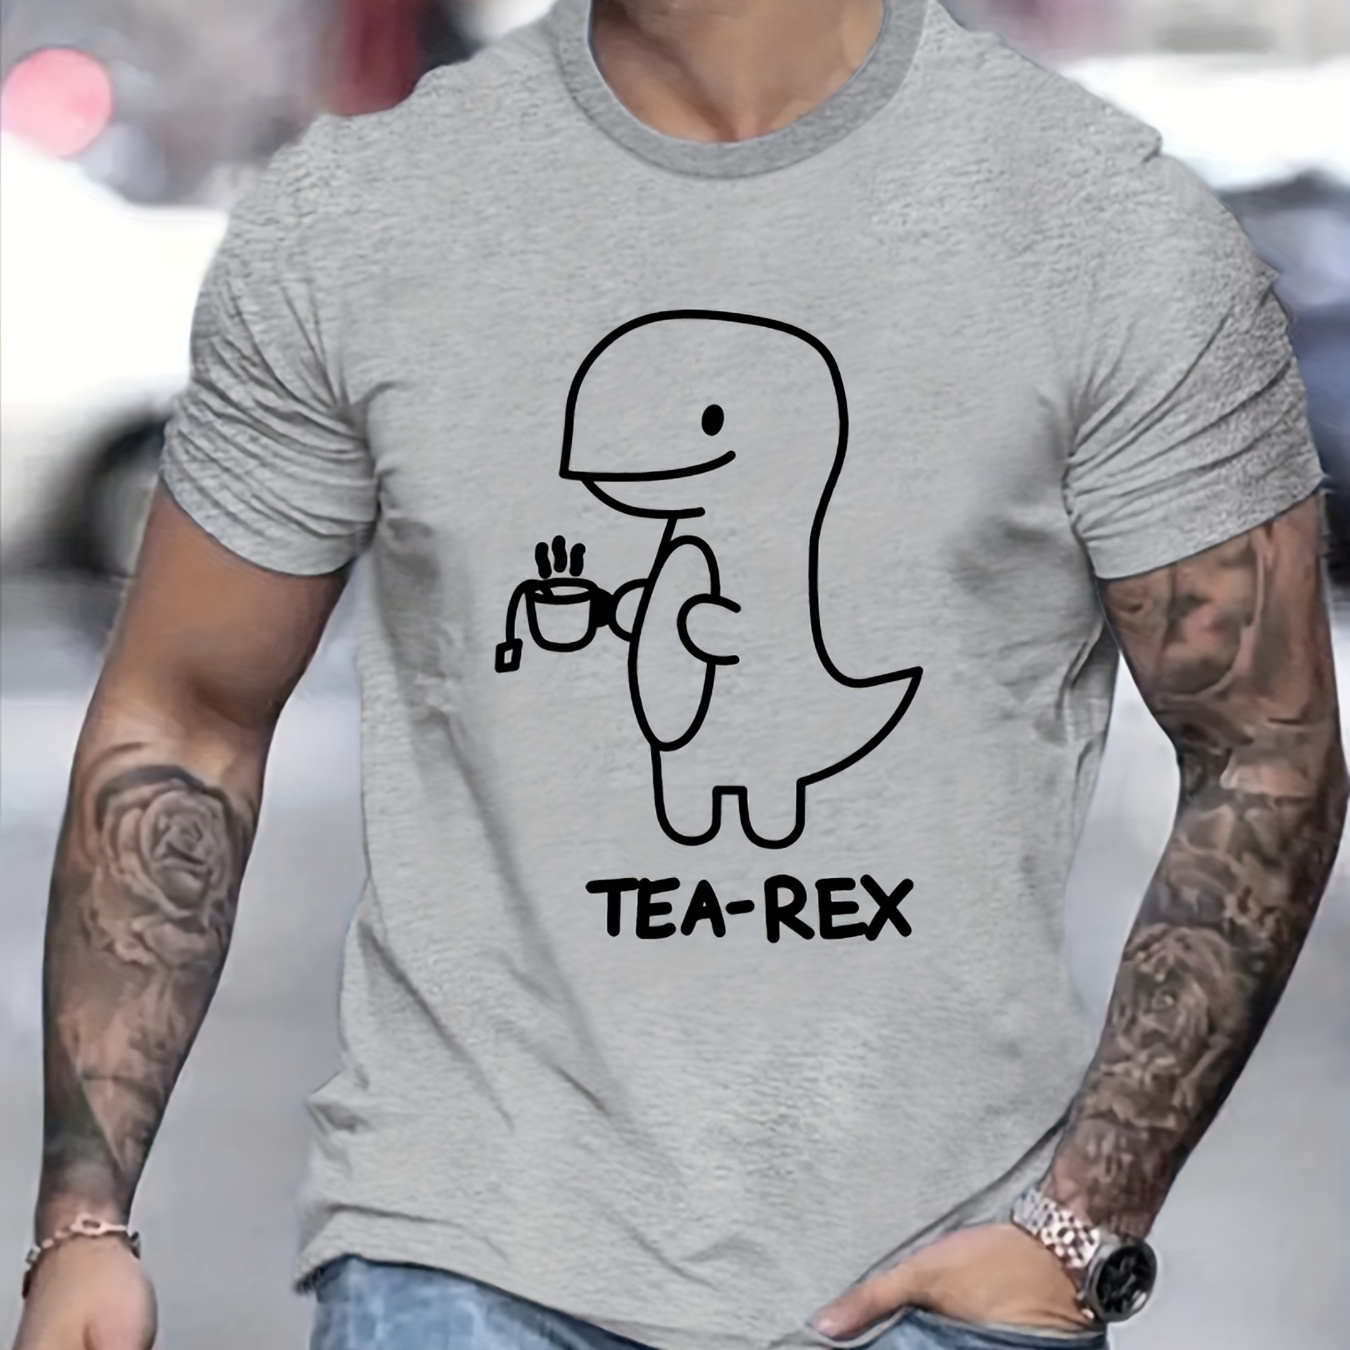 

Tea-rex Graphic Print, Men's Novel Graphic Design T-shirt, Casual Comfy Tees For Summer, Men's Clothing Tops For Daily Activities